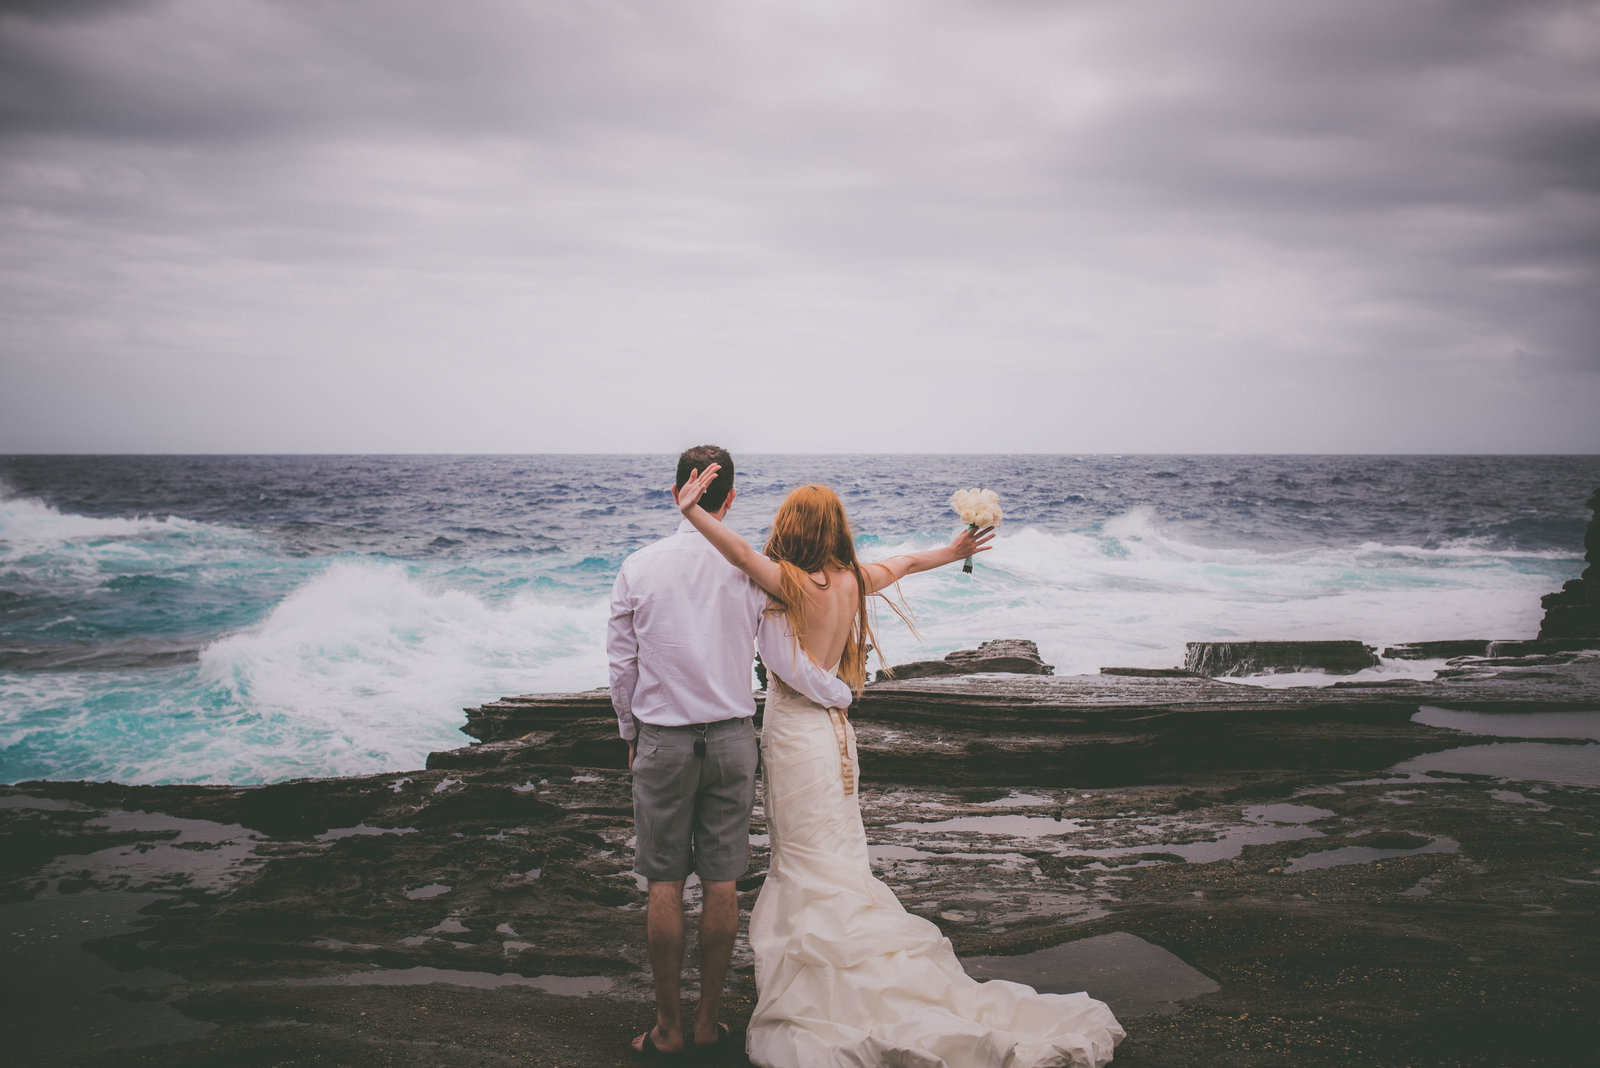 Bride raises arms when wave crashes in Hawaii.